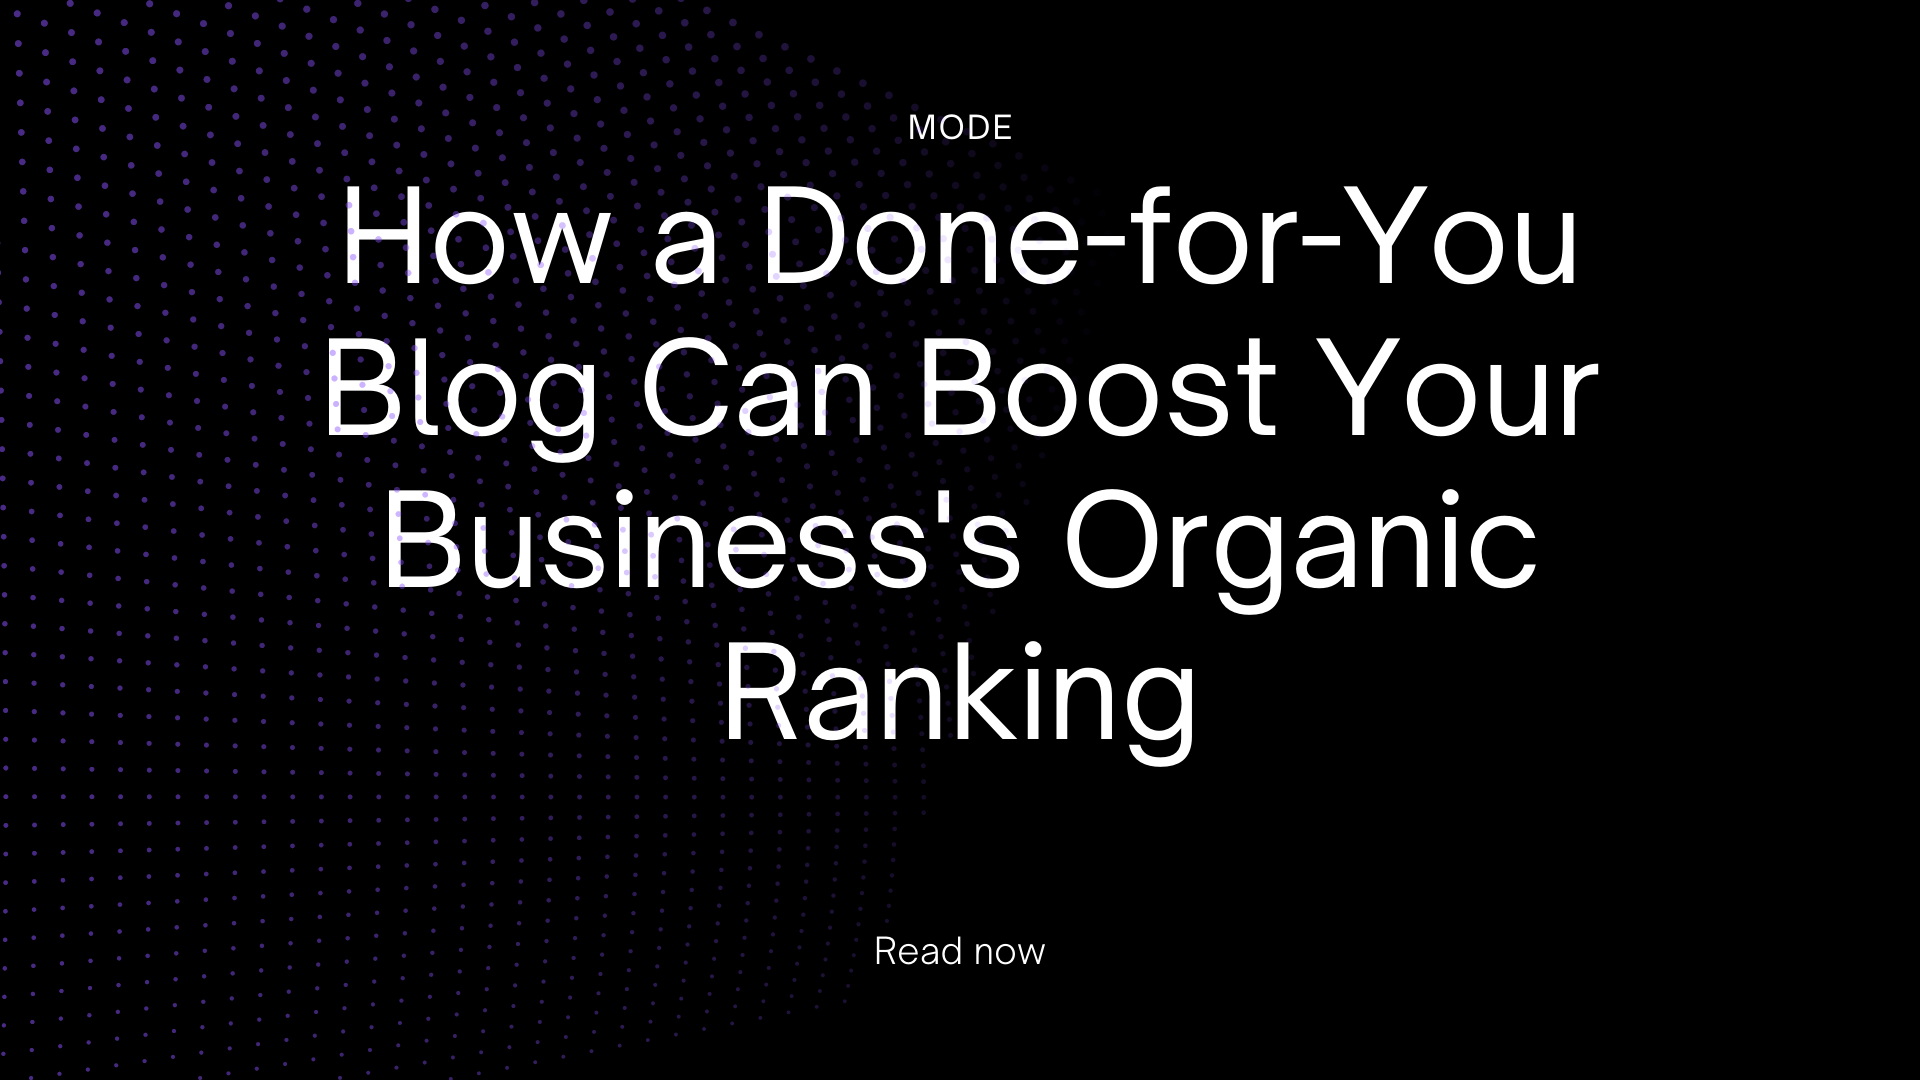 How a Done-for-You Blog Can Boost Your Business's Organic Ranking